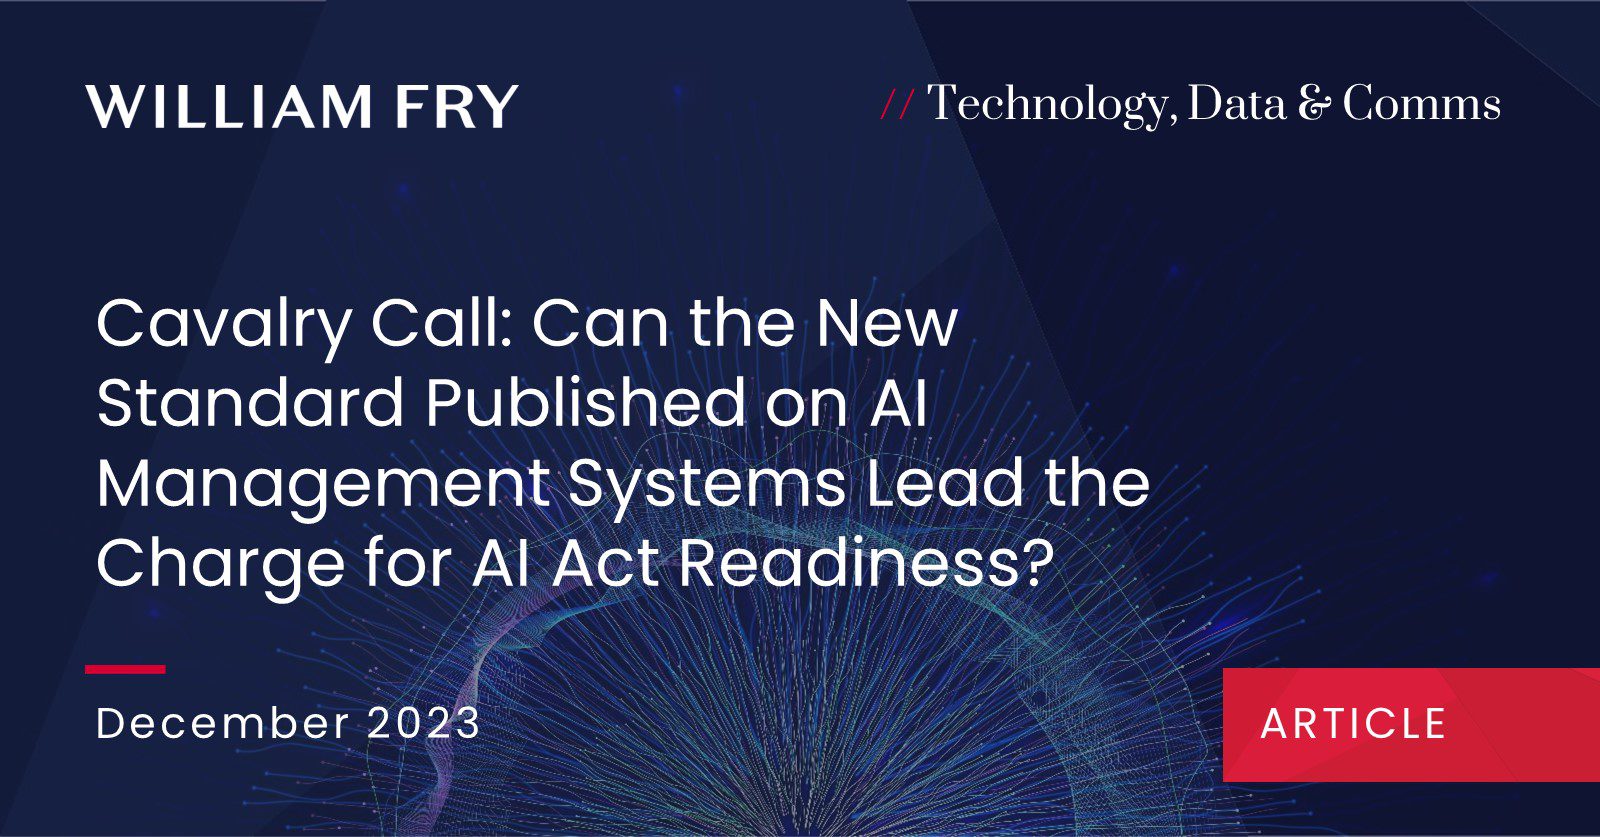 Cavalry Call: Can the New Standard Published on AI Management Systems Lead the Charge for AI Act Readiness?